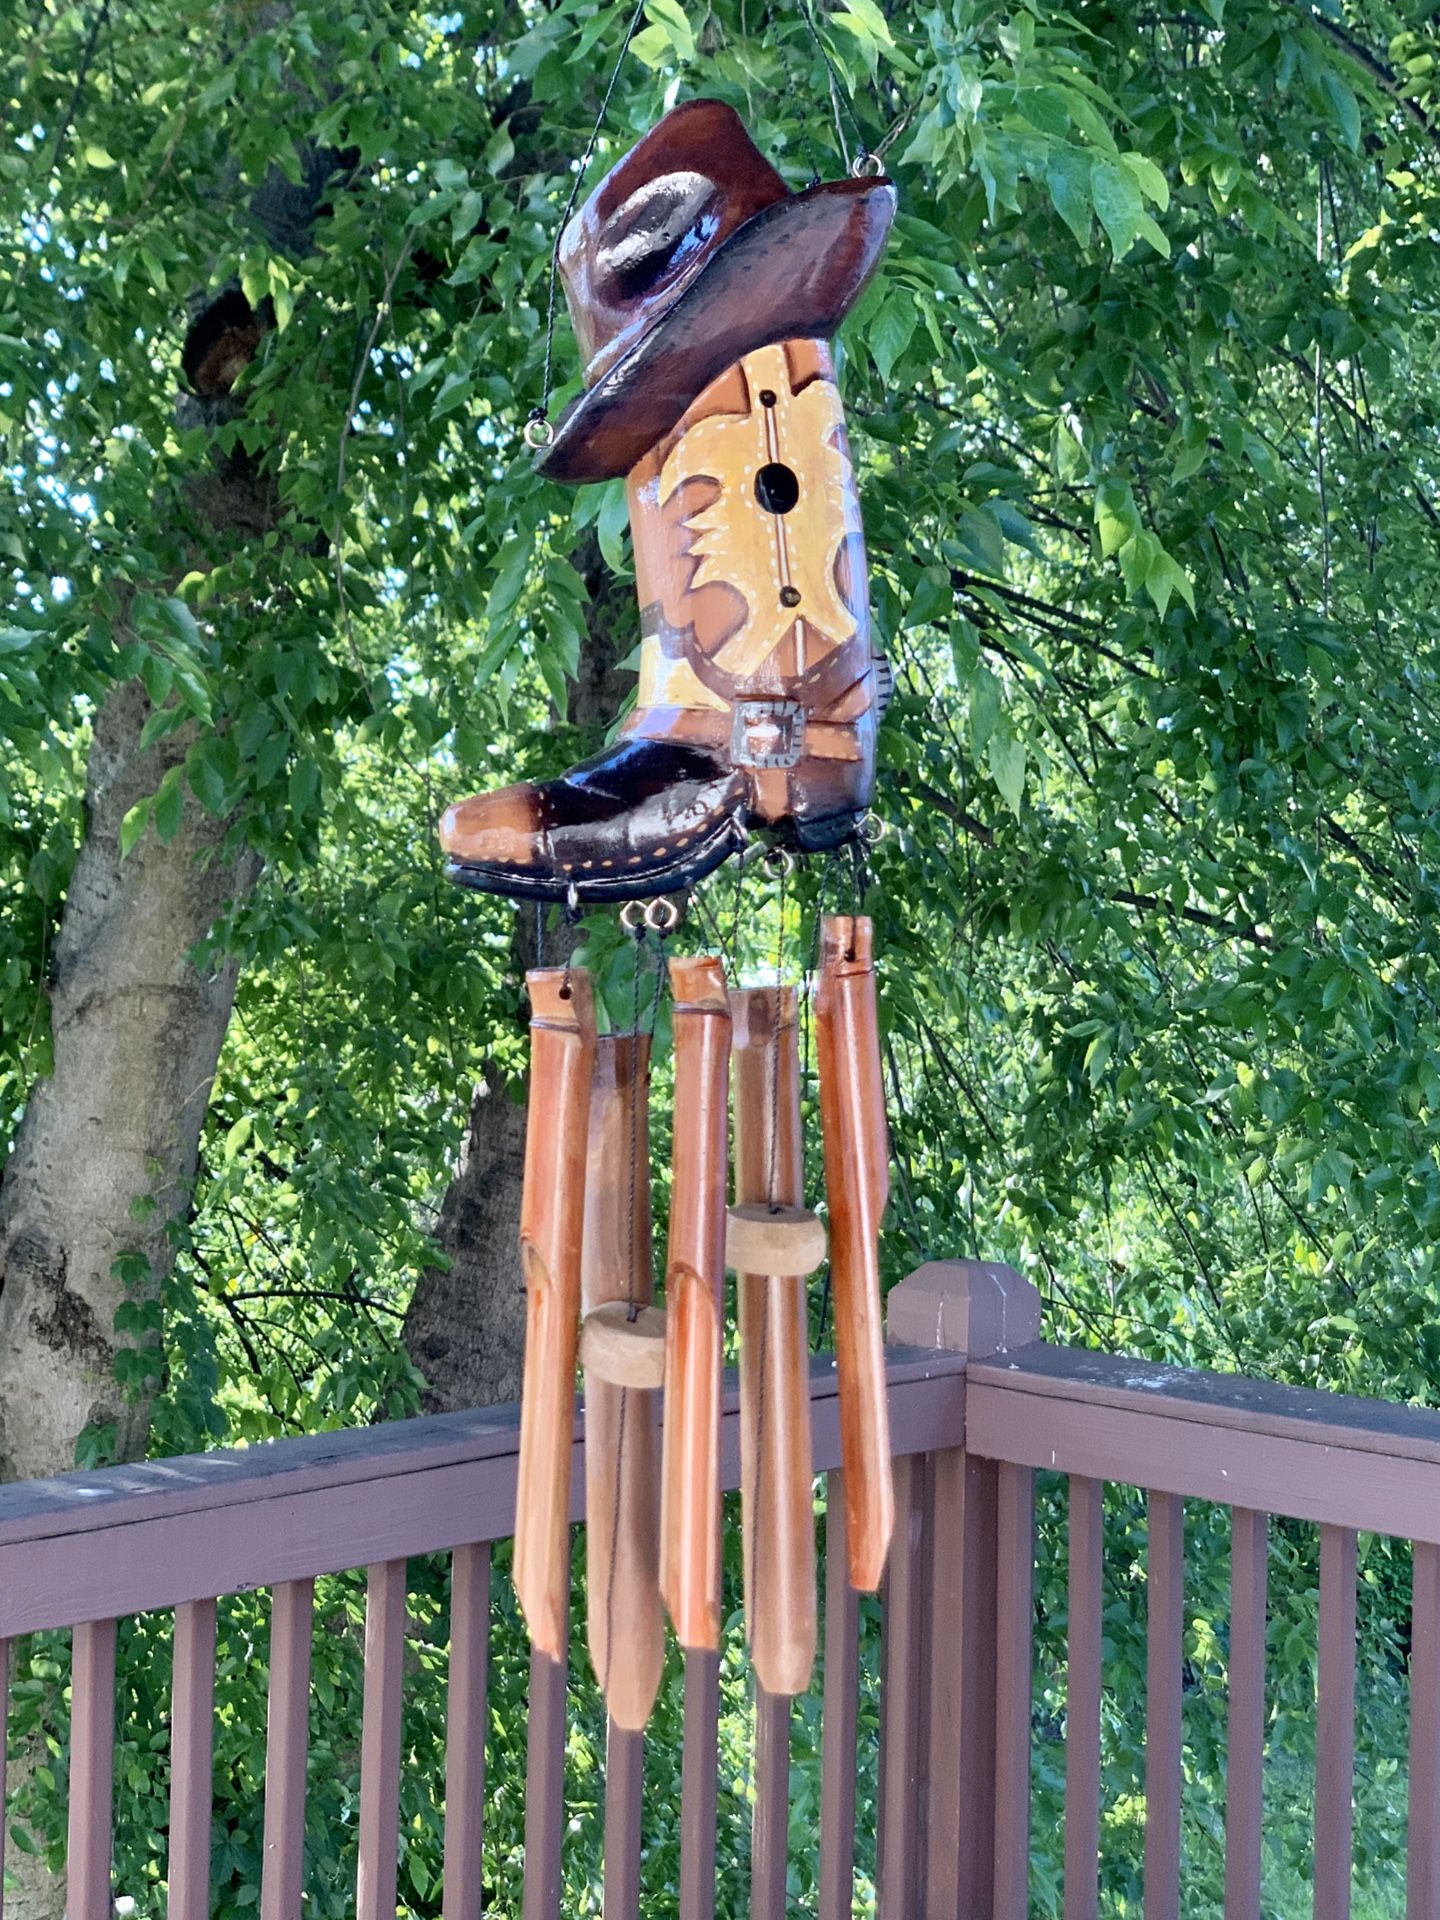 Ranch Style Texan Western Cowboy Hat & Boot Country Music Bamboo Artisan Wind Chime Mobile